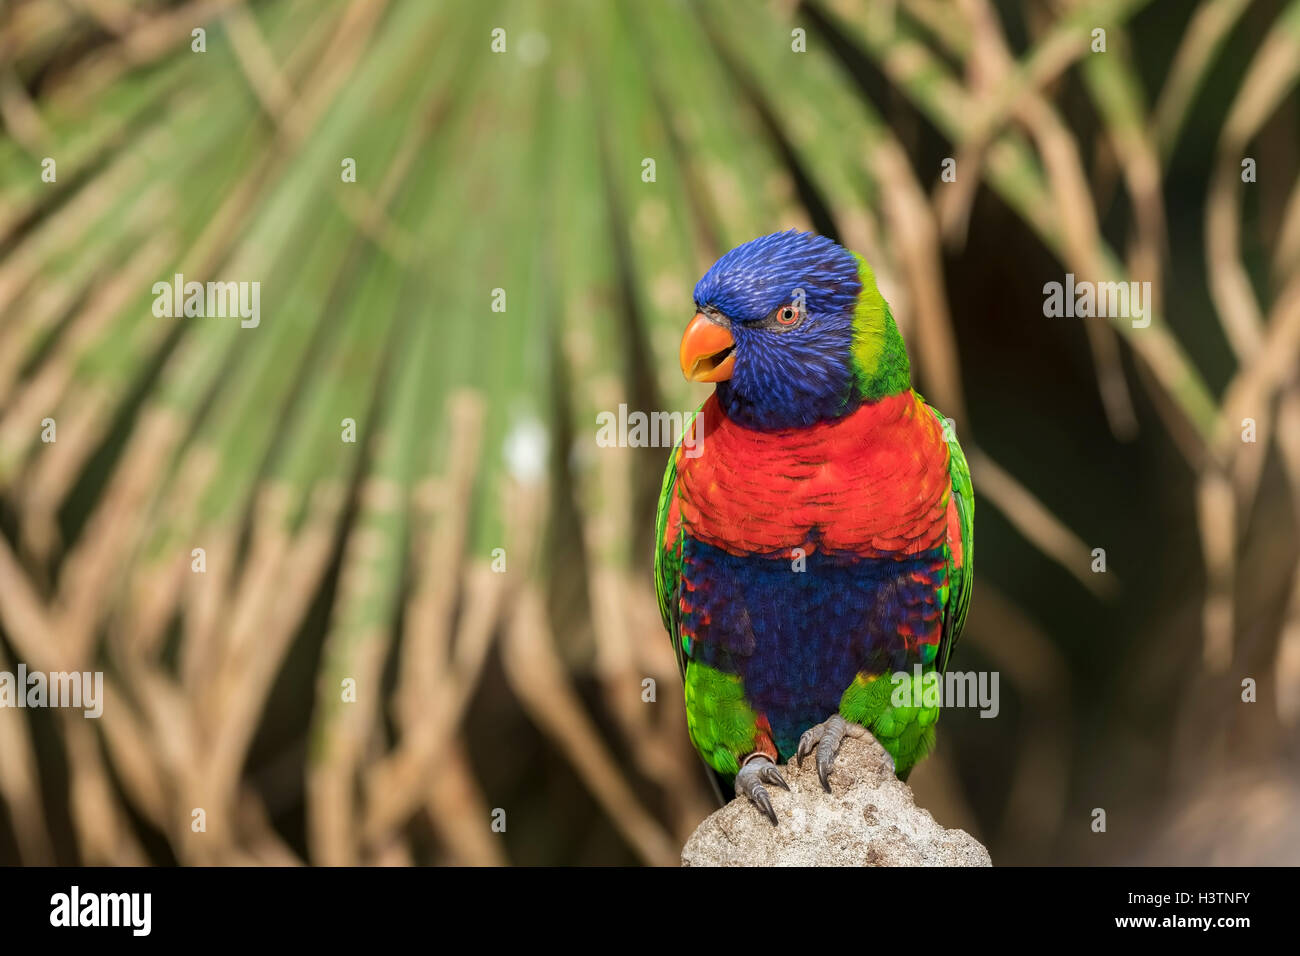 Closeup of a perched rainbow lorikeet (Trichoglossus moluccanus) or rainbow lory parrot. A vibrant colored bird native to Austra Stock Photo